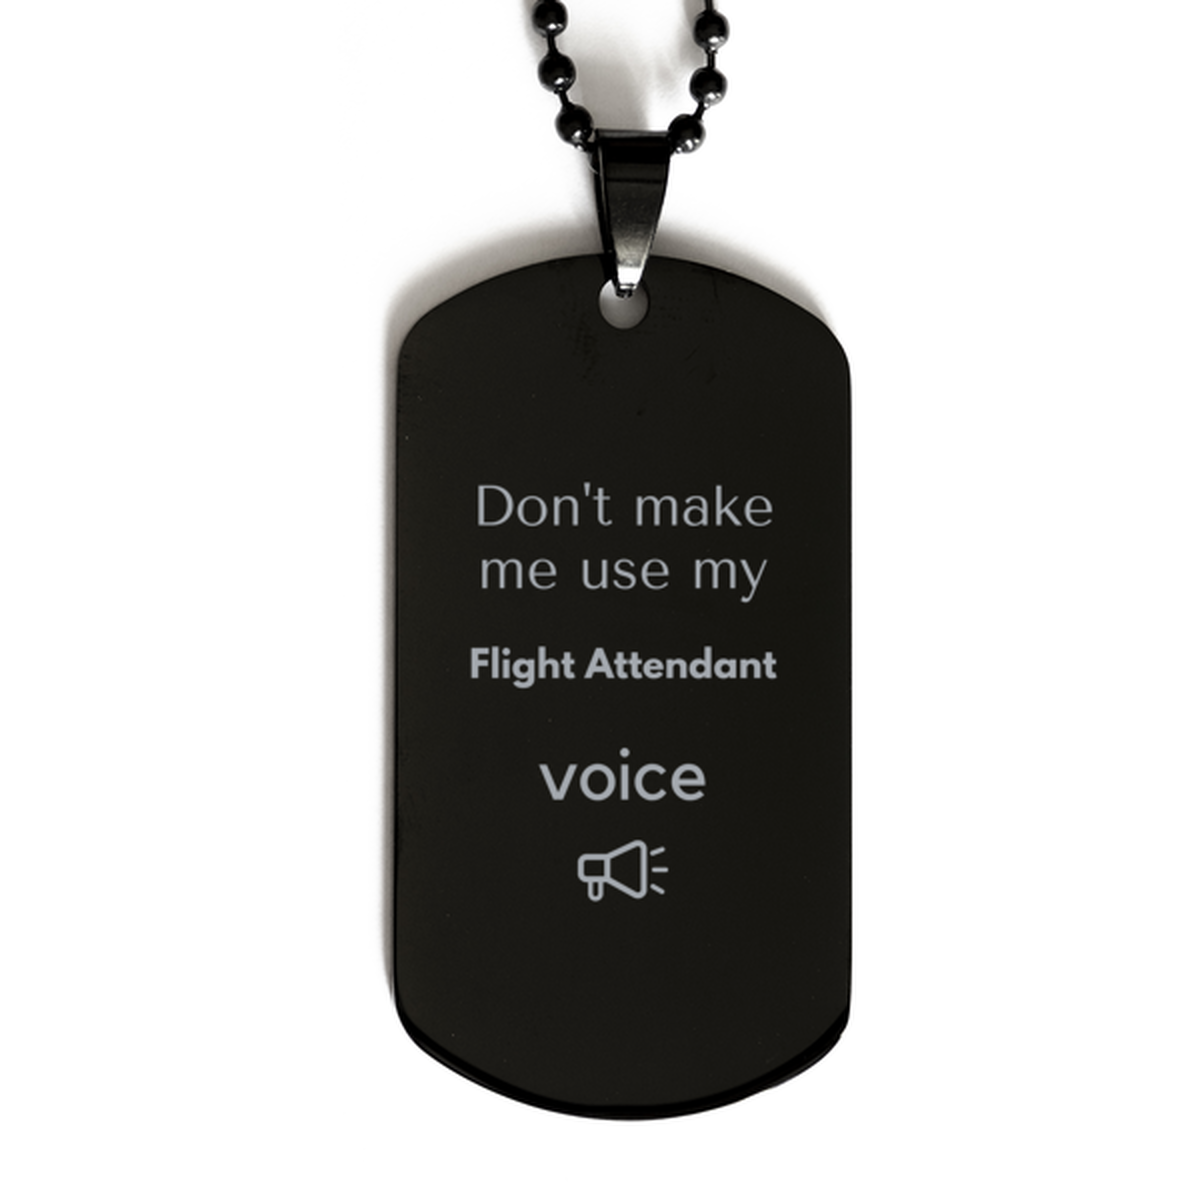 Don't make me use my Flight Attendant voice, Sarcasm Flight Attendant Gifts, Christmas Flight Attendant Black Dog Tag Birthday Unique Gifts For Flight Attendant Coworkers, Men, Women, Colleague, Friends